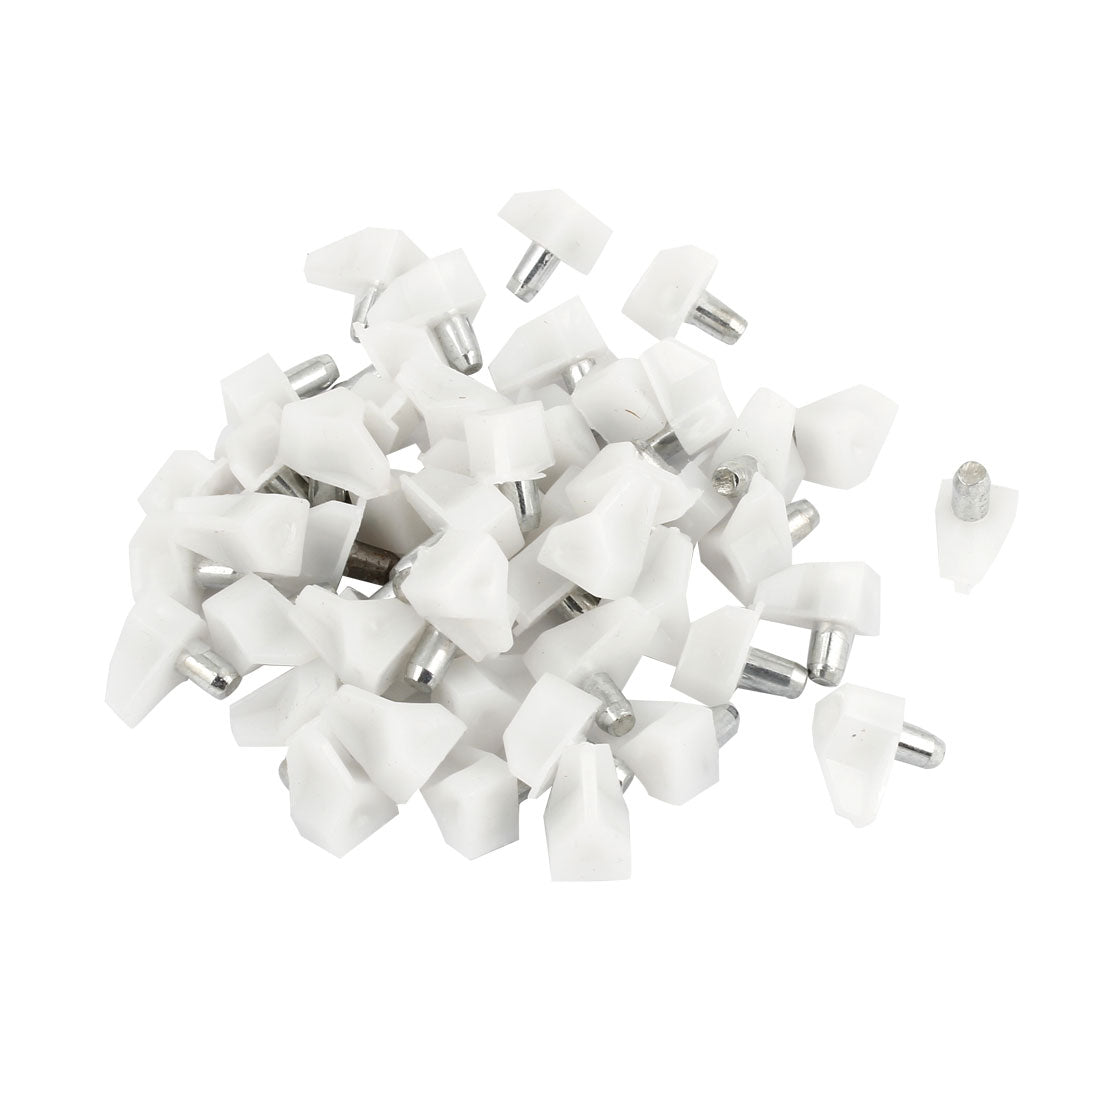 uxcell Uxcell Furniture Hardware Glass Plastic Shelf Support Pin Silver Tone White 50 Pcs